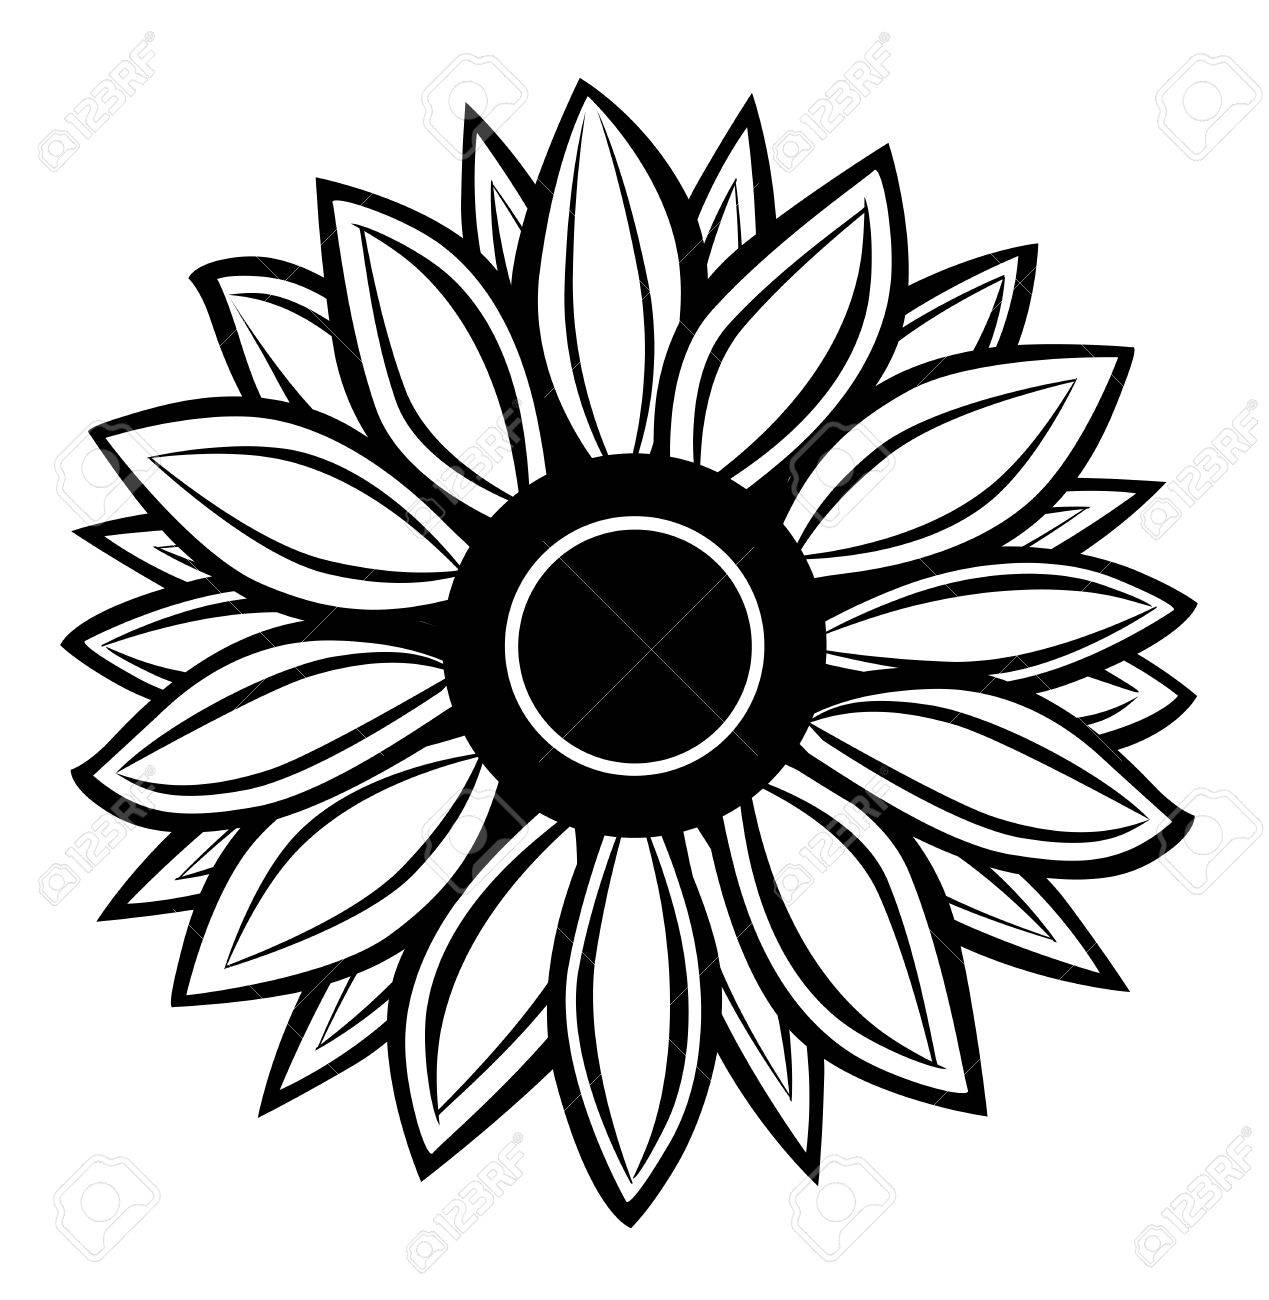 Sunflower Drawing Black And White | Free download on ...